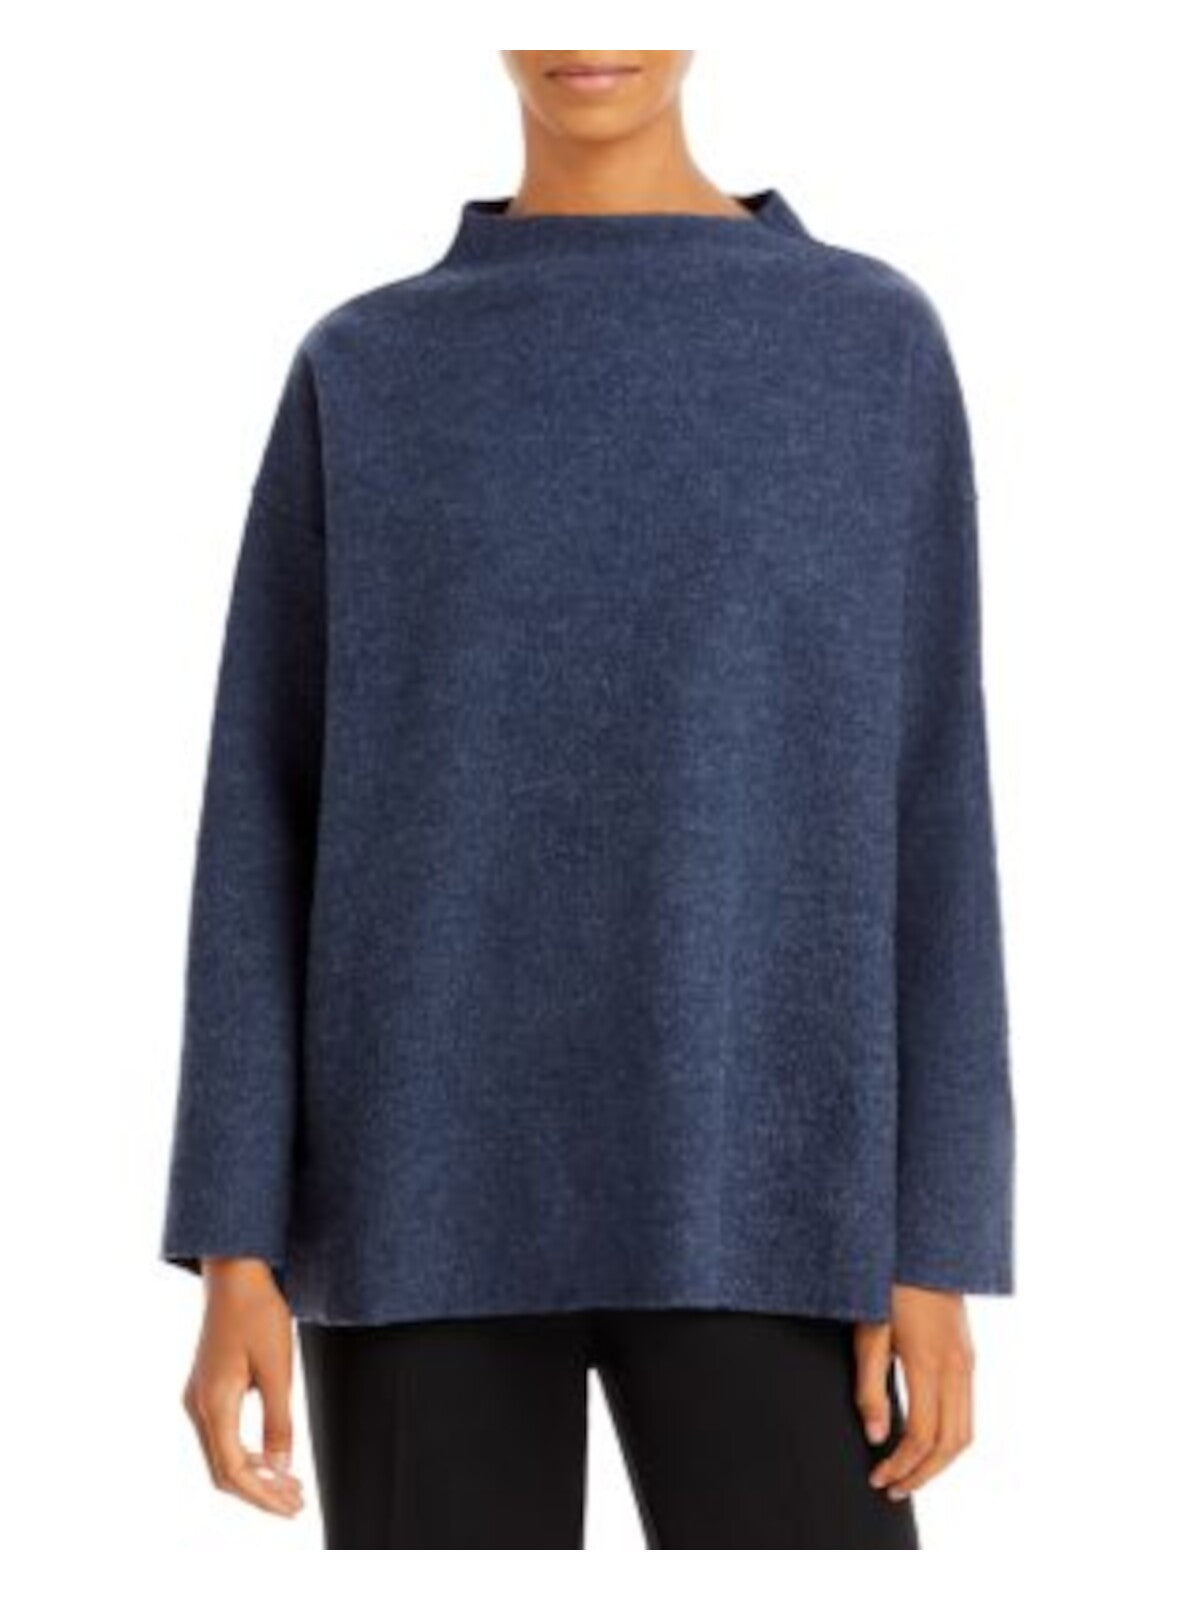 EILEEN FISHER Womens Navy Textured Funnel Neck  Side Vents Long Sleeve Sweater S